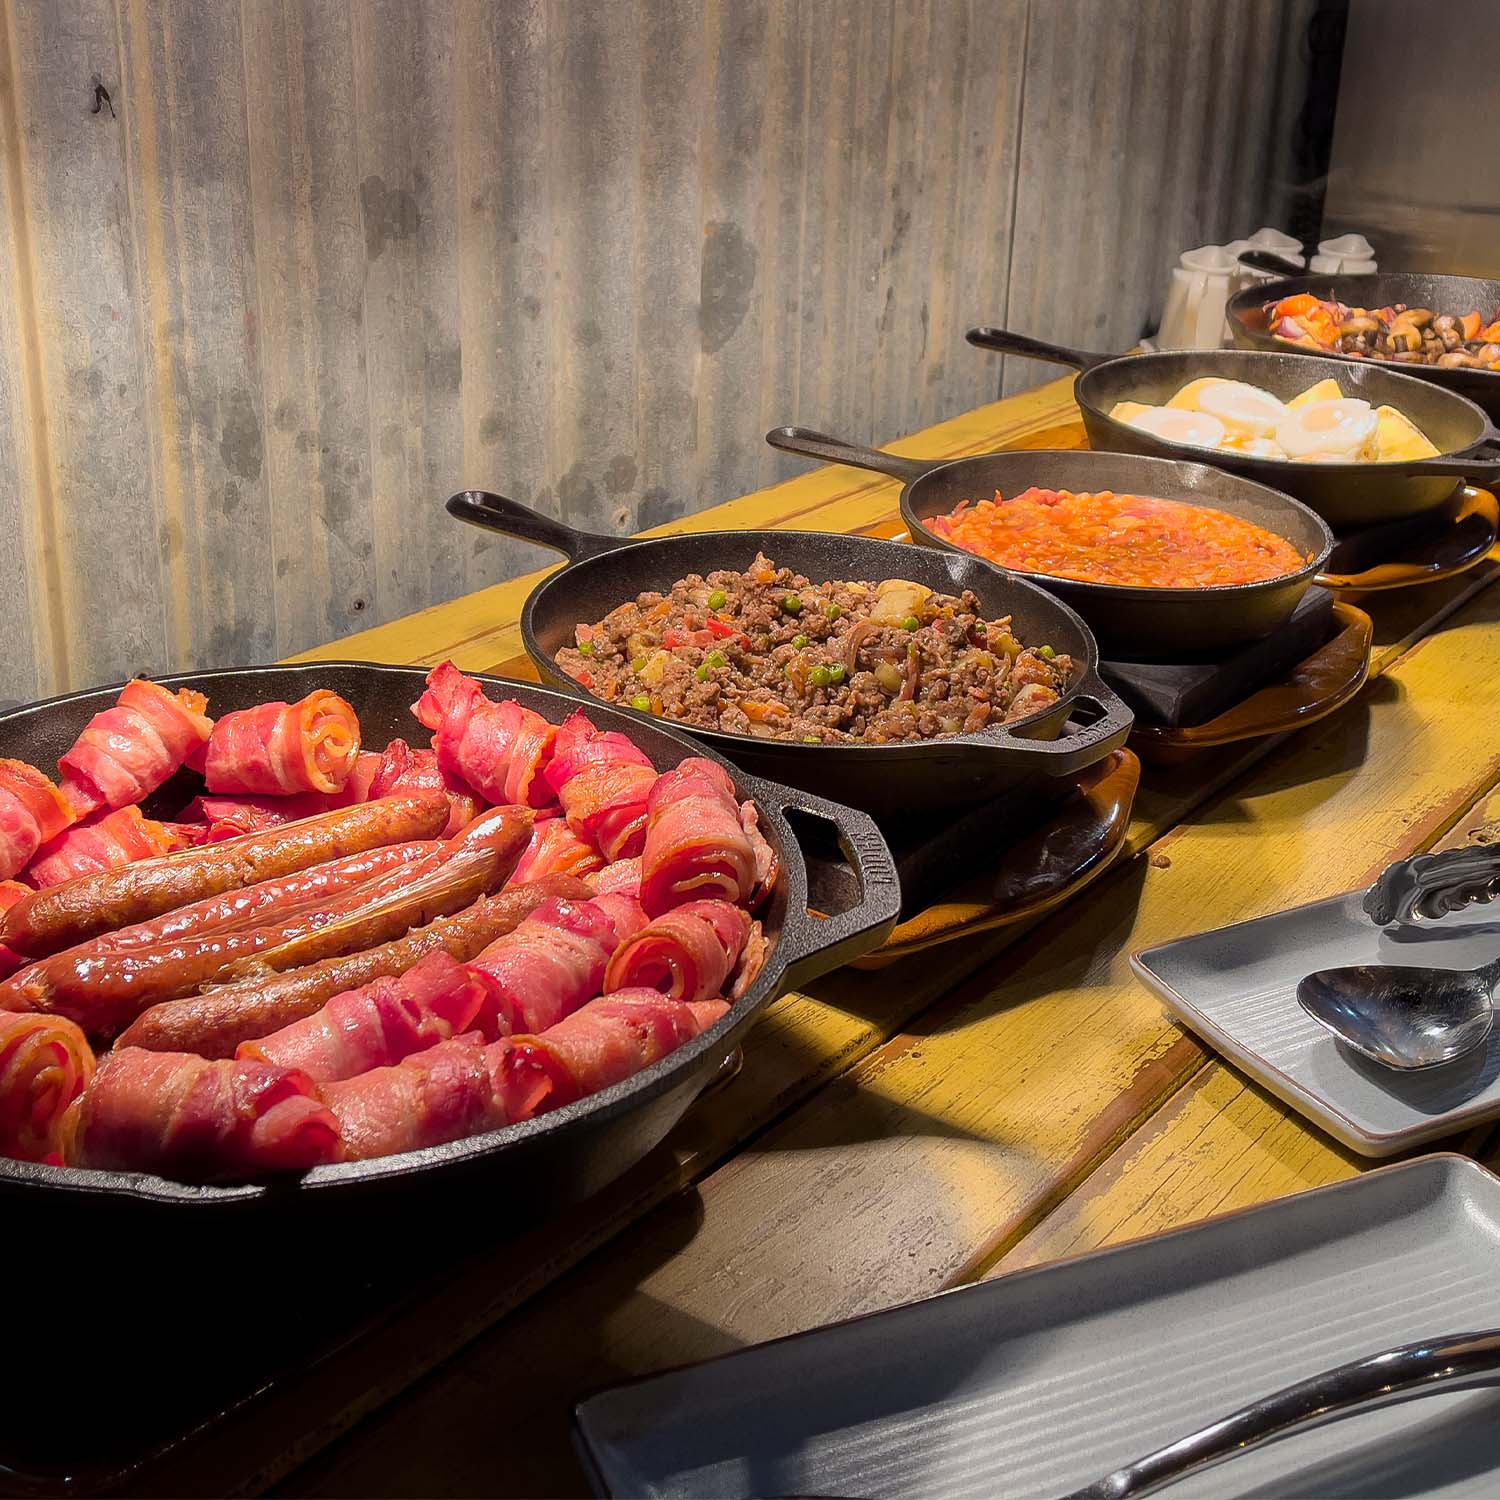 A row of pans containing breakfast foods under a heat lamp